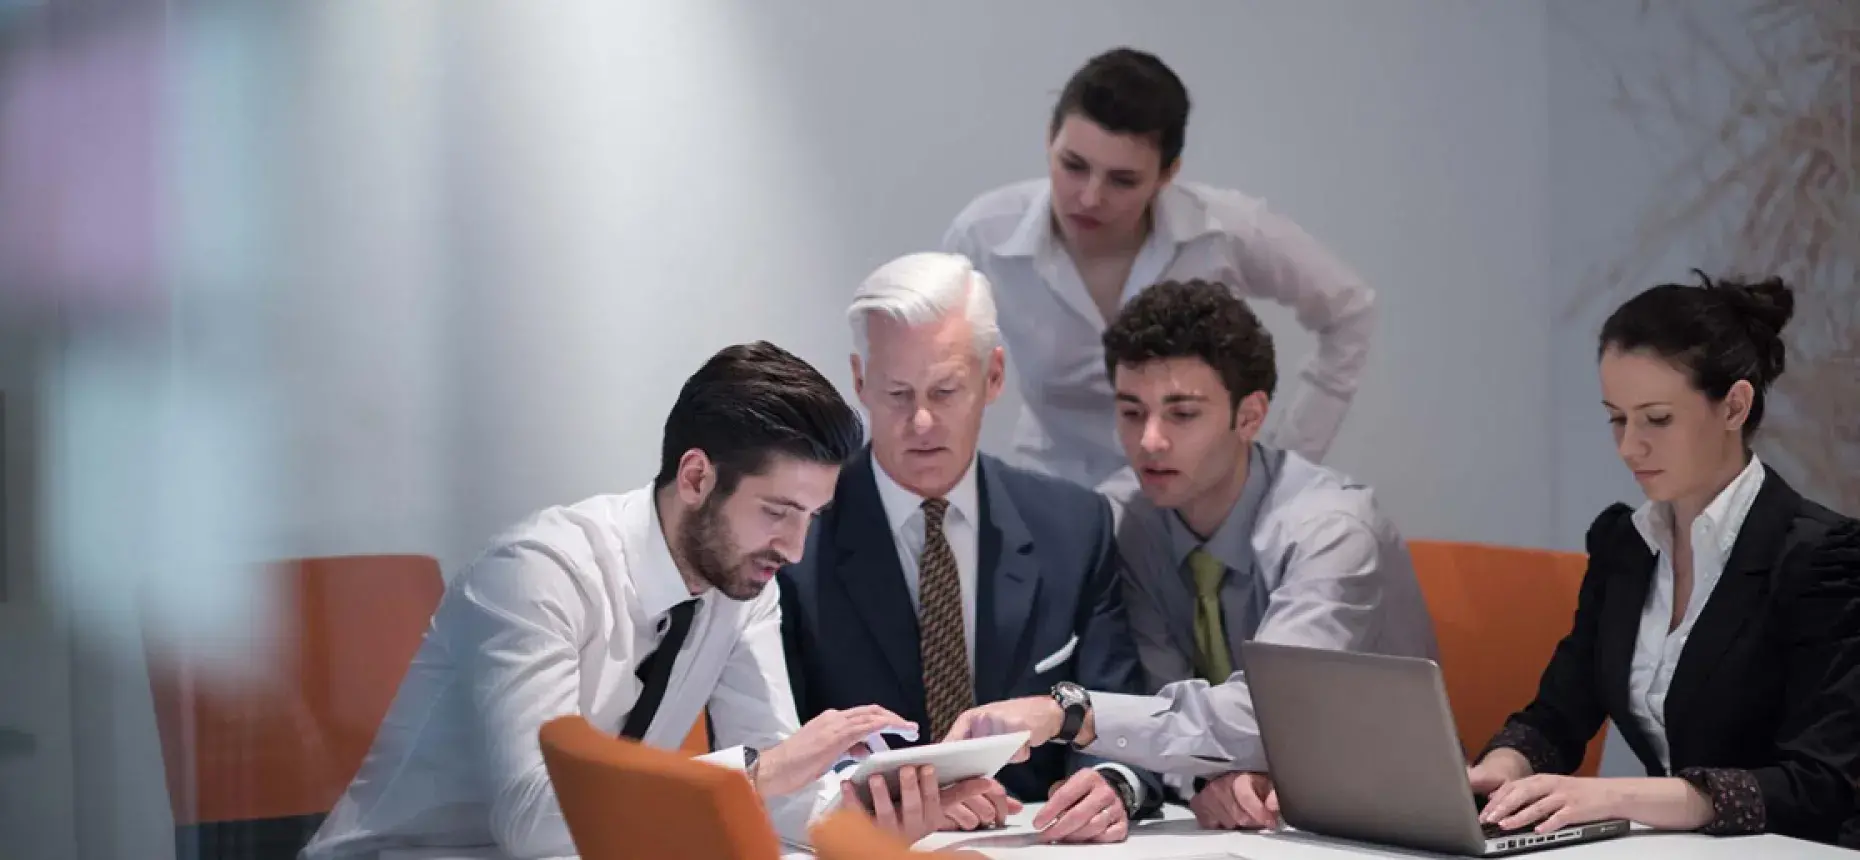 4 employees looking at tablet while fifth employee types on laptop